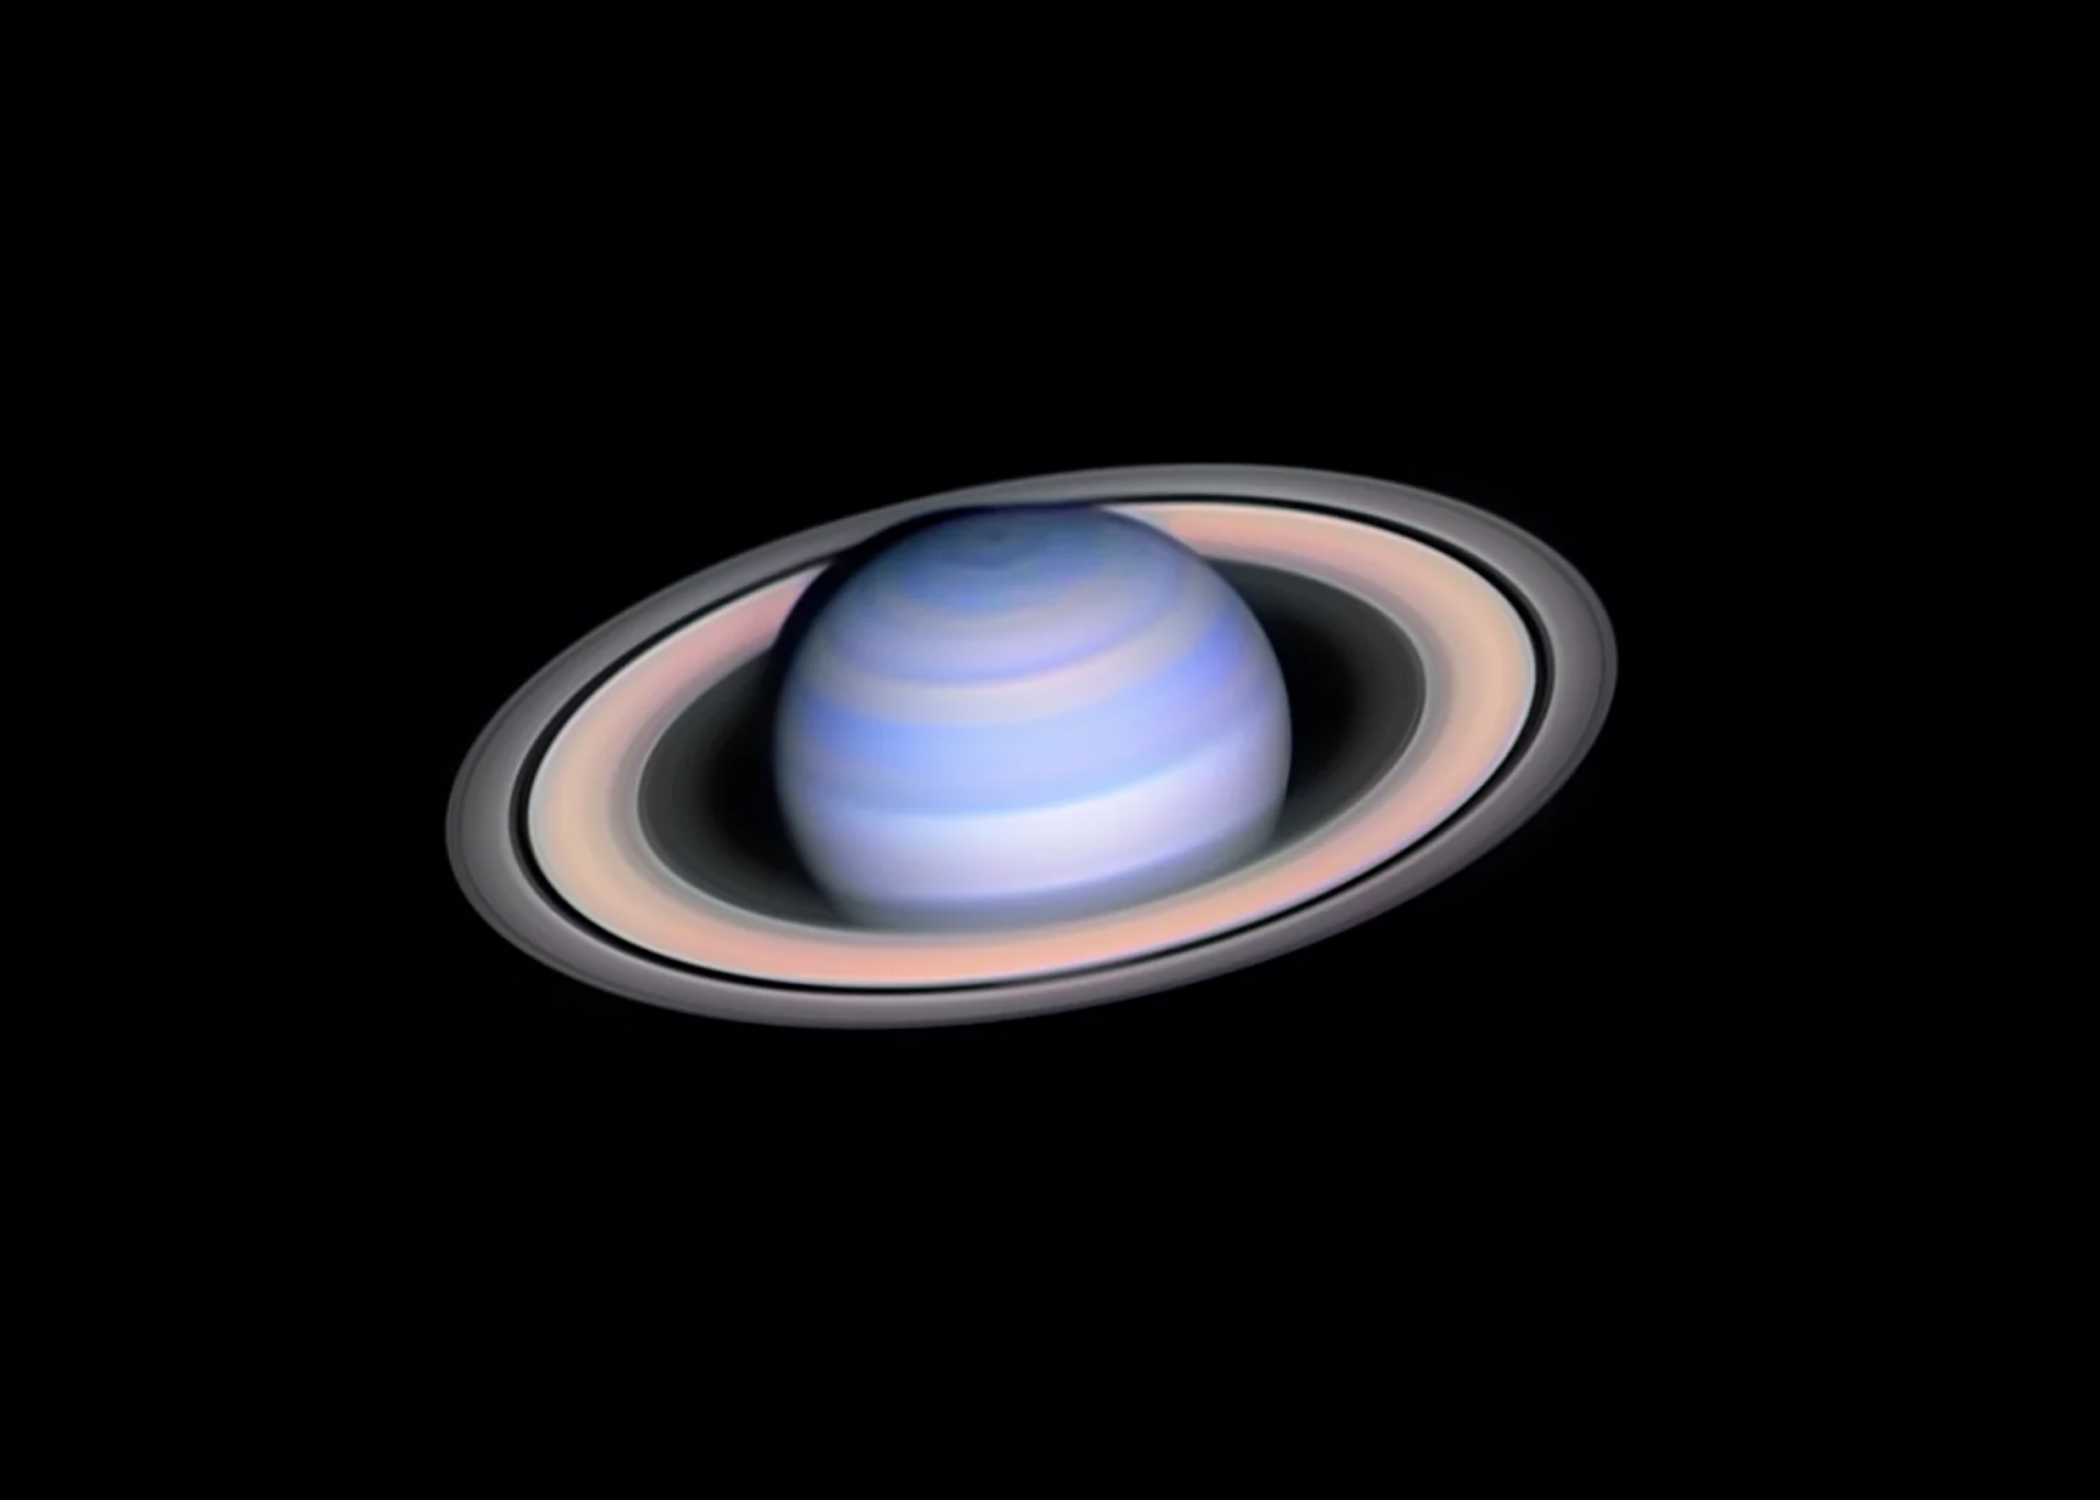 A giant moon collision may have given rise to Saturn's rings | Space